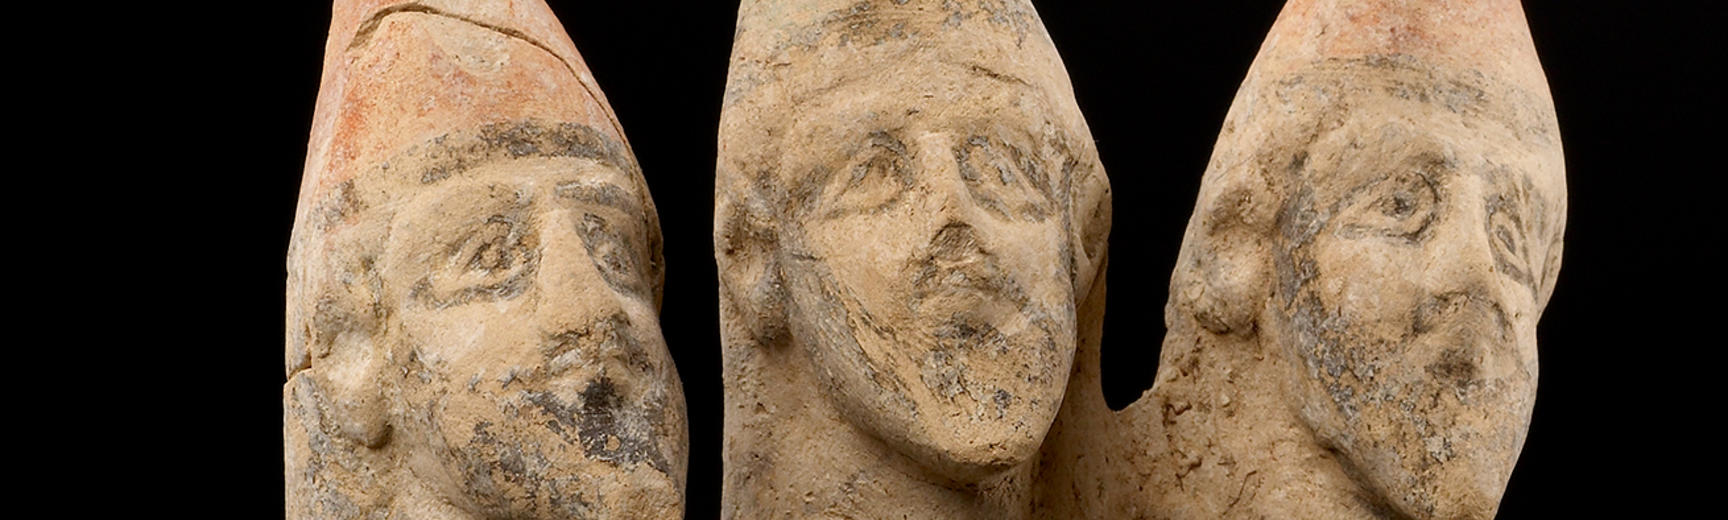 A stone sculpture of three male heads